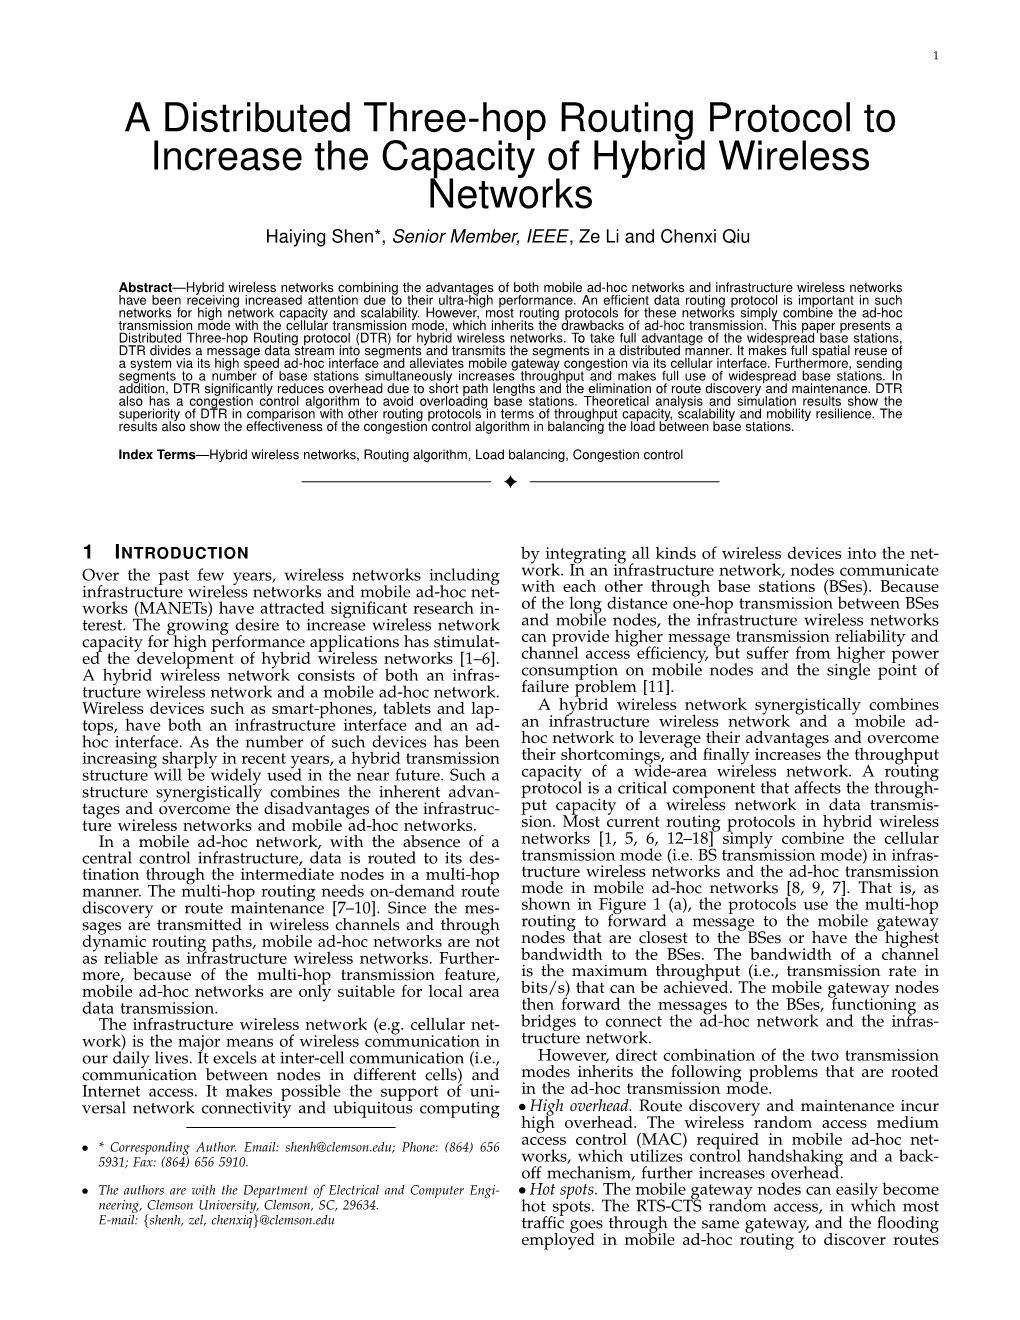 A Distributed Three-Hop Routing Protocol to Increase the Capacity of Hybrid Wireless Networks Haiying Shen*, Senior Member, IEEE, Ze Li and Chenxi Qiu